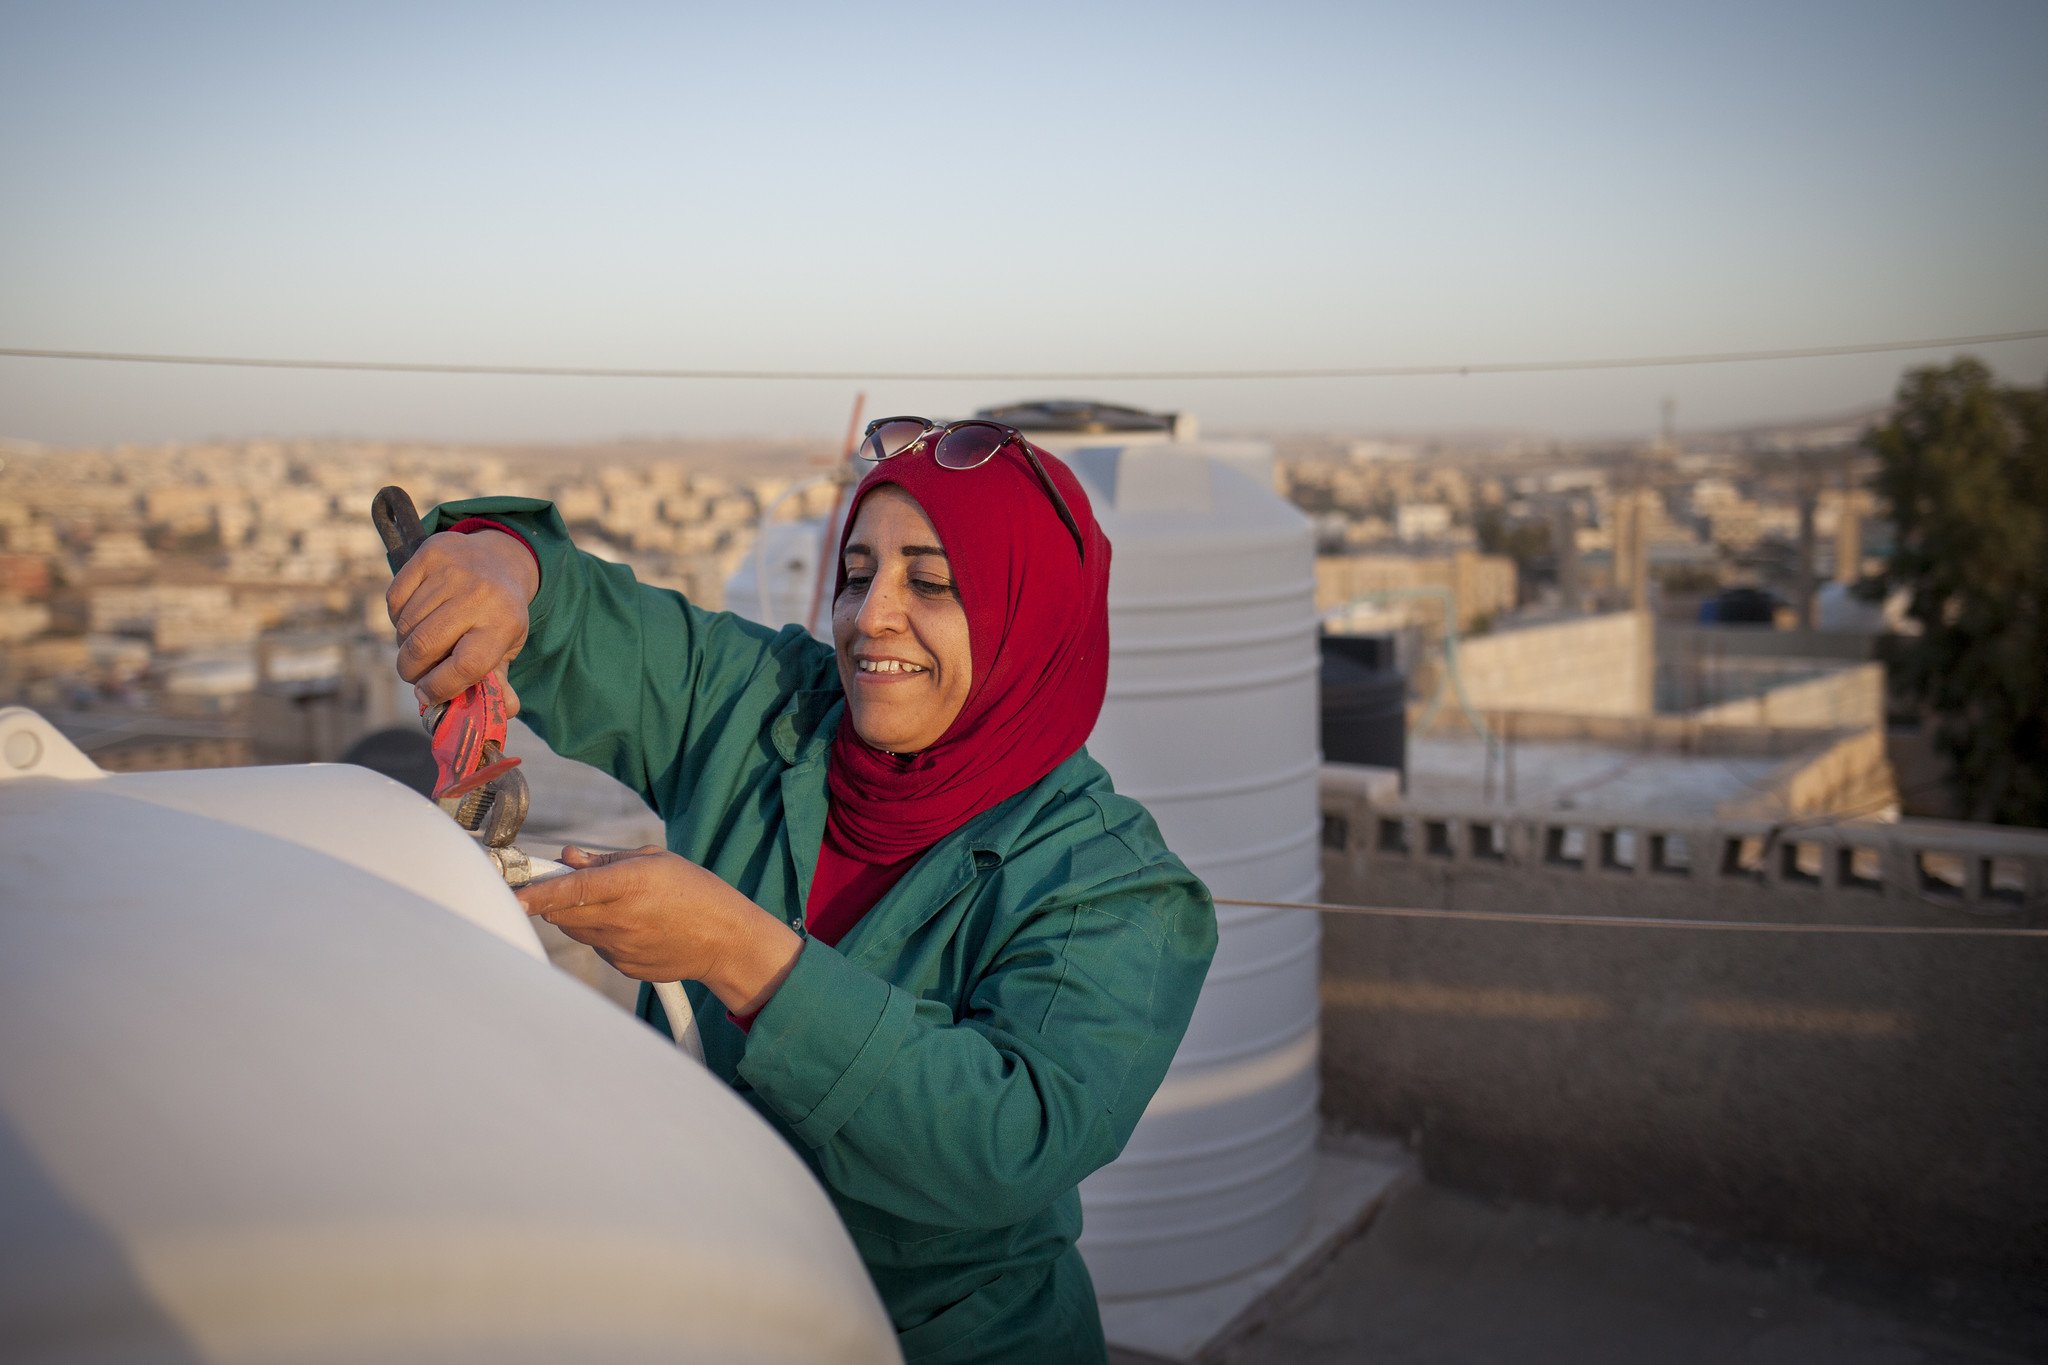 Apart from promoting sustainable solutions to address the needs of Syrians in refugee camps, we provide support for host communities. With over 40 per cent of Jordan’s water lost through leakages across the country, Oxfam trained more than 400 women in both Zarqa and Balqa governorates to fix water leakages and seize the opportunity to become plumbers. Mariam (pictured) joined our programme and is training other women across Zarqa to become plumbers. (Photo: Abbie Trayler-Smith / Oxfam)